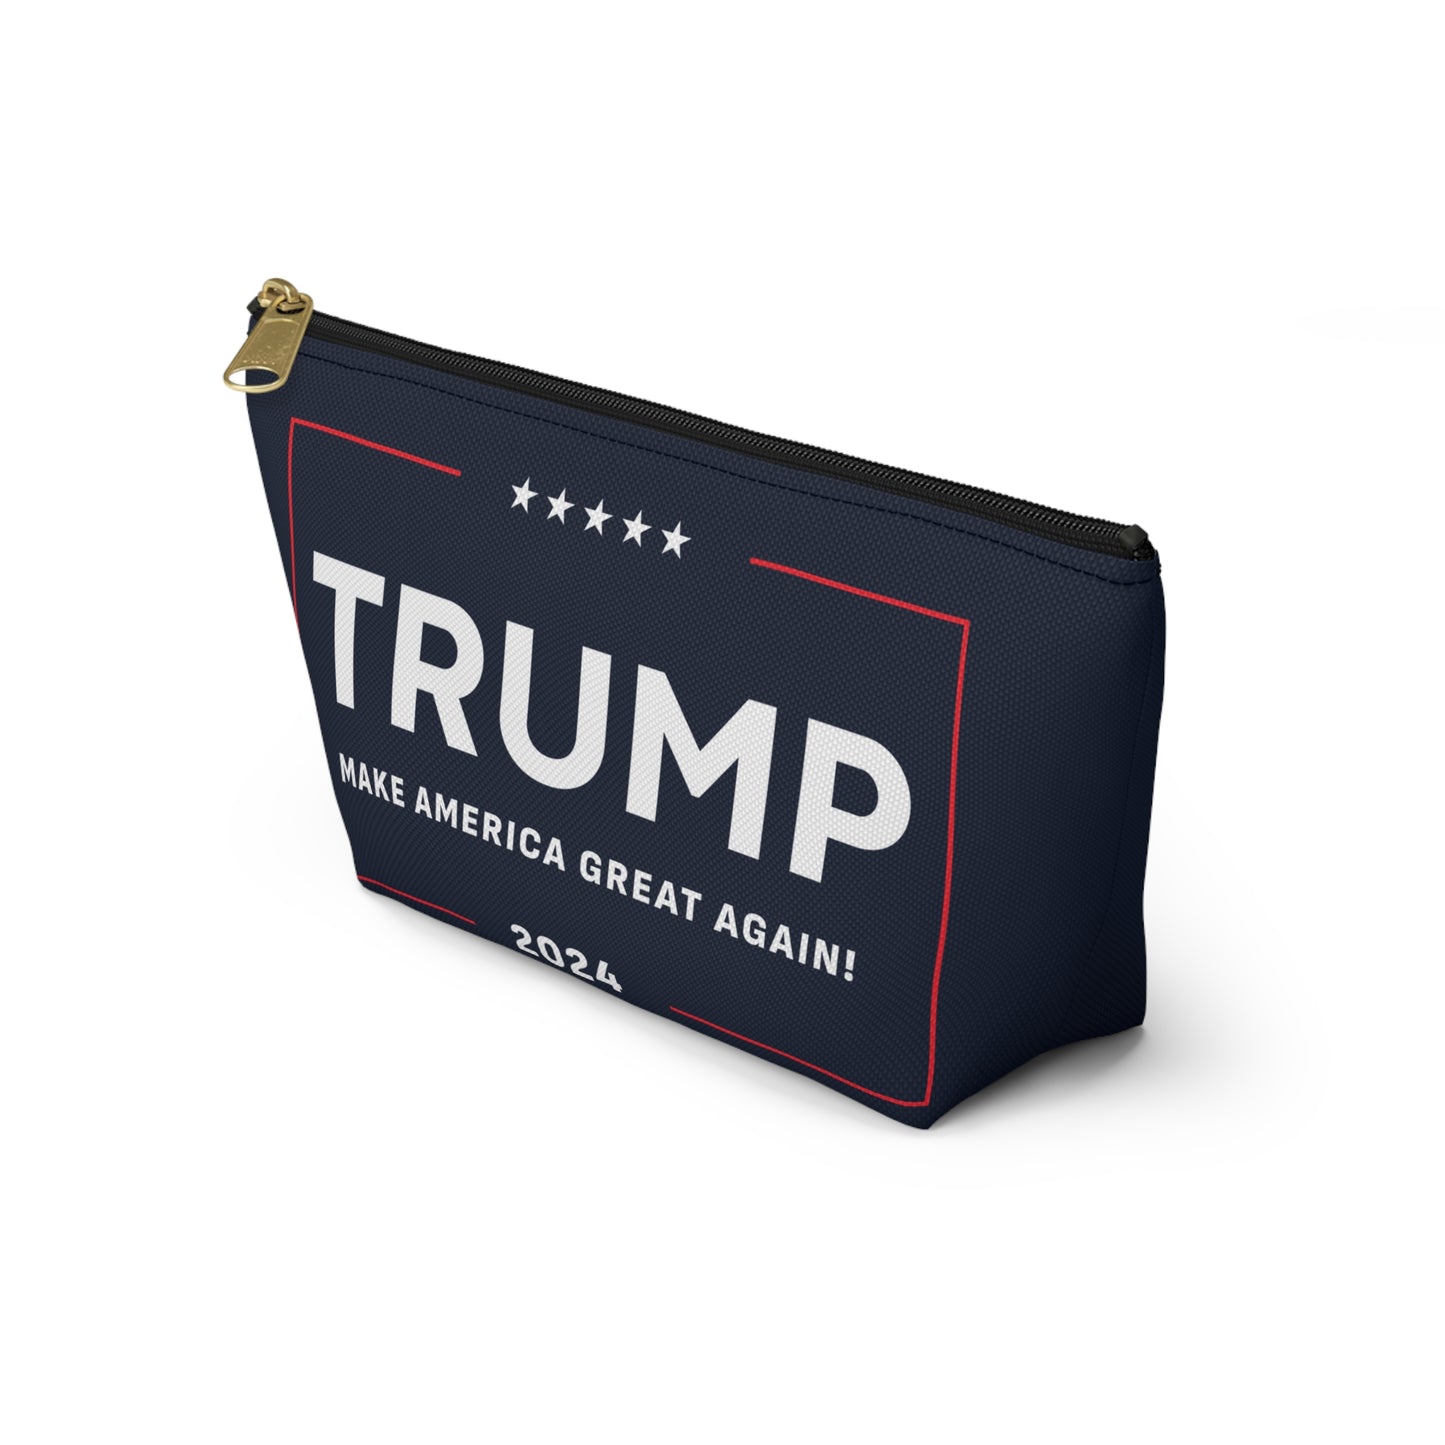 Trump MAGA Make America Great Again Accessory Pouch w T-bottom Mother's Day Anniversary Gift Present